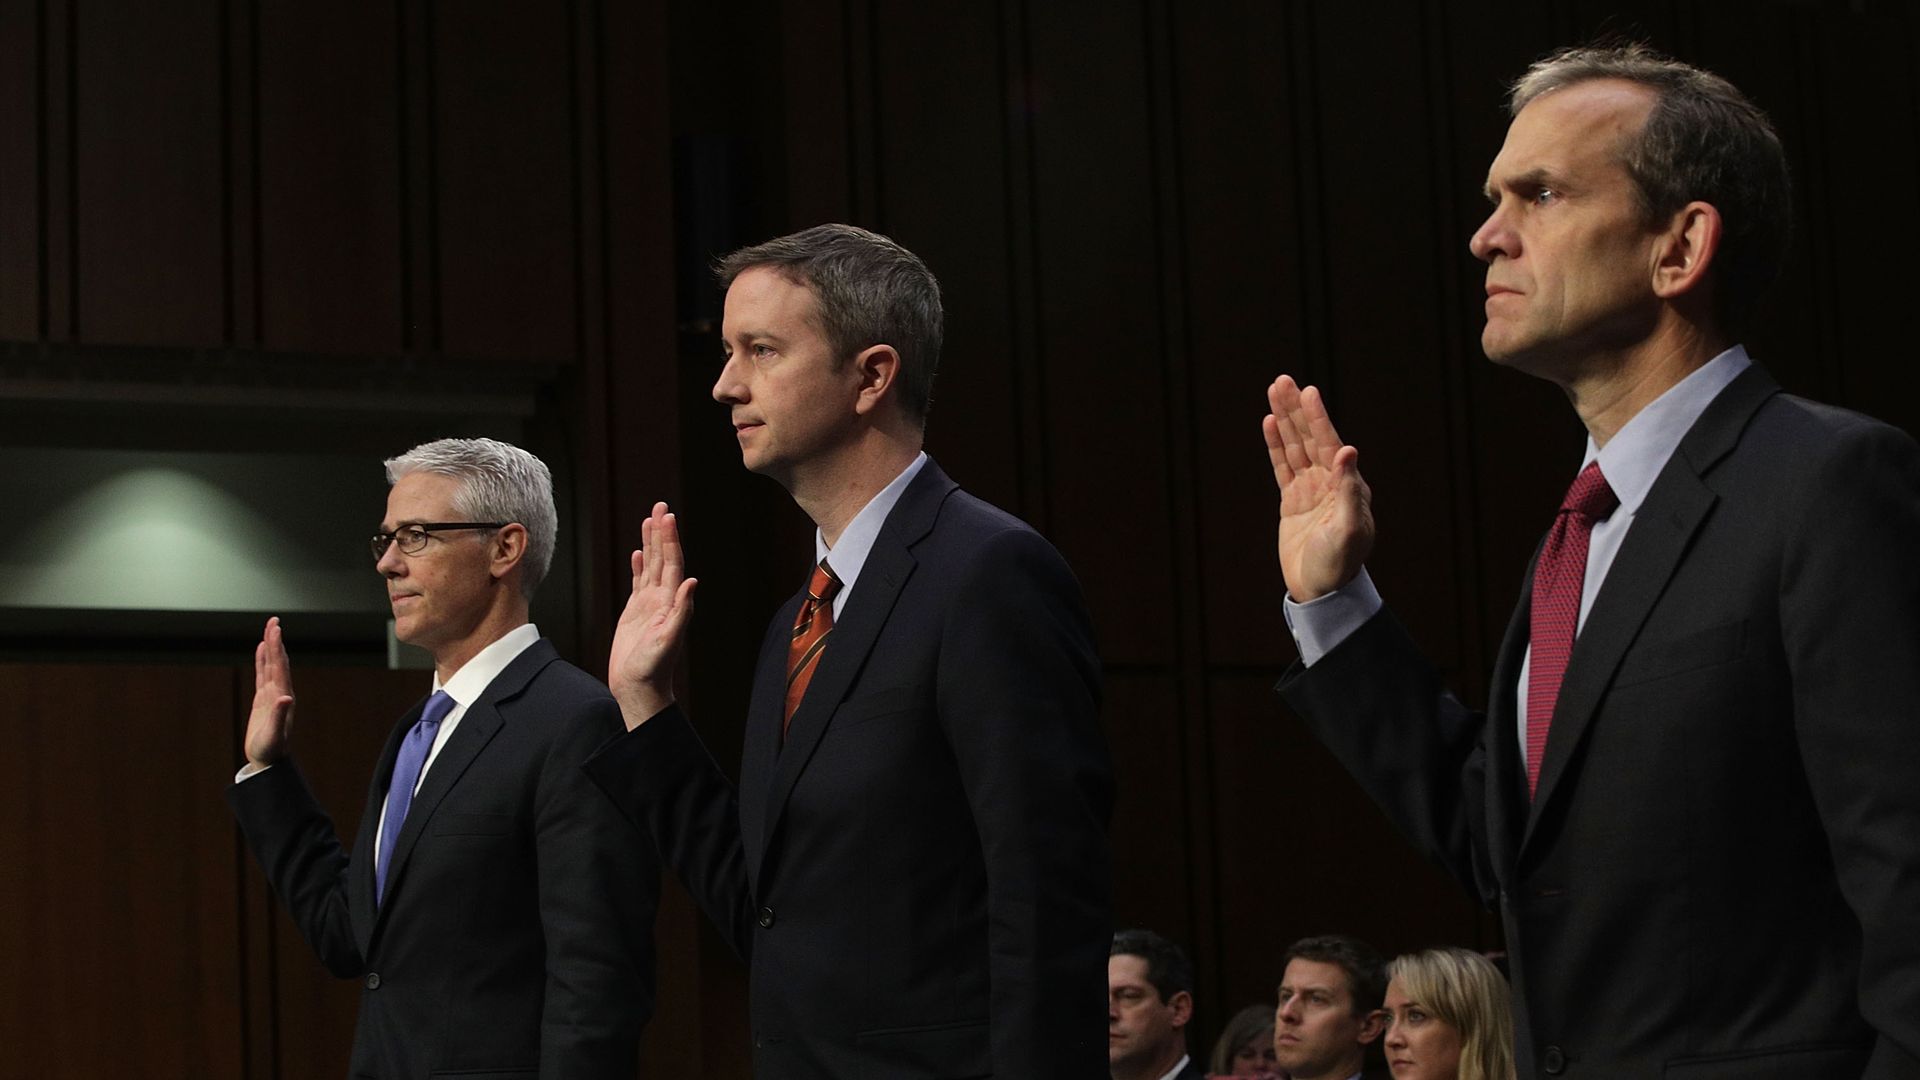 Employees of Facebook, Twitter and Alphabet are sworn in to testify before a congressional hearing